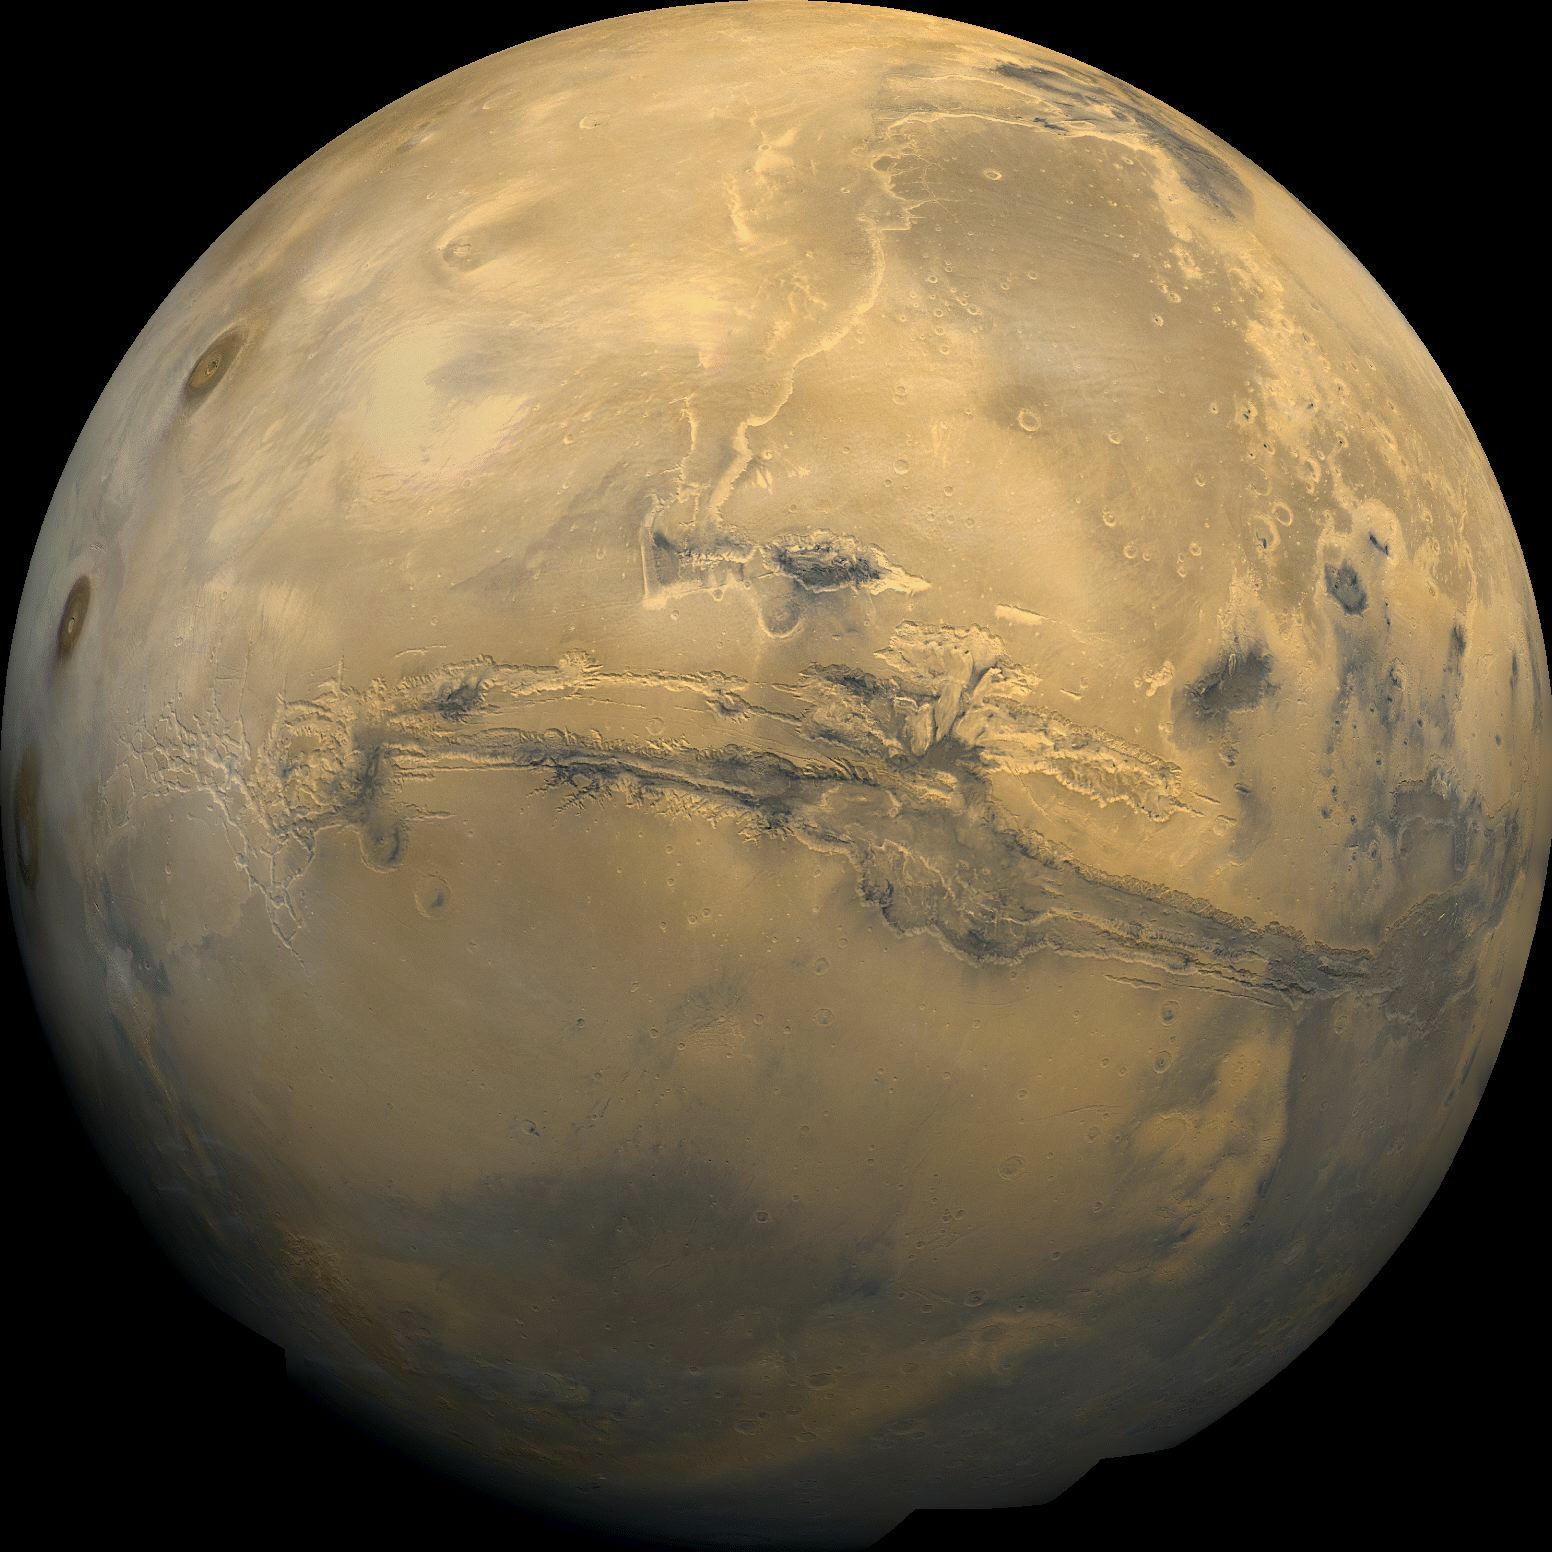 Electrical power is critical for exploring Mars 